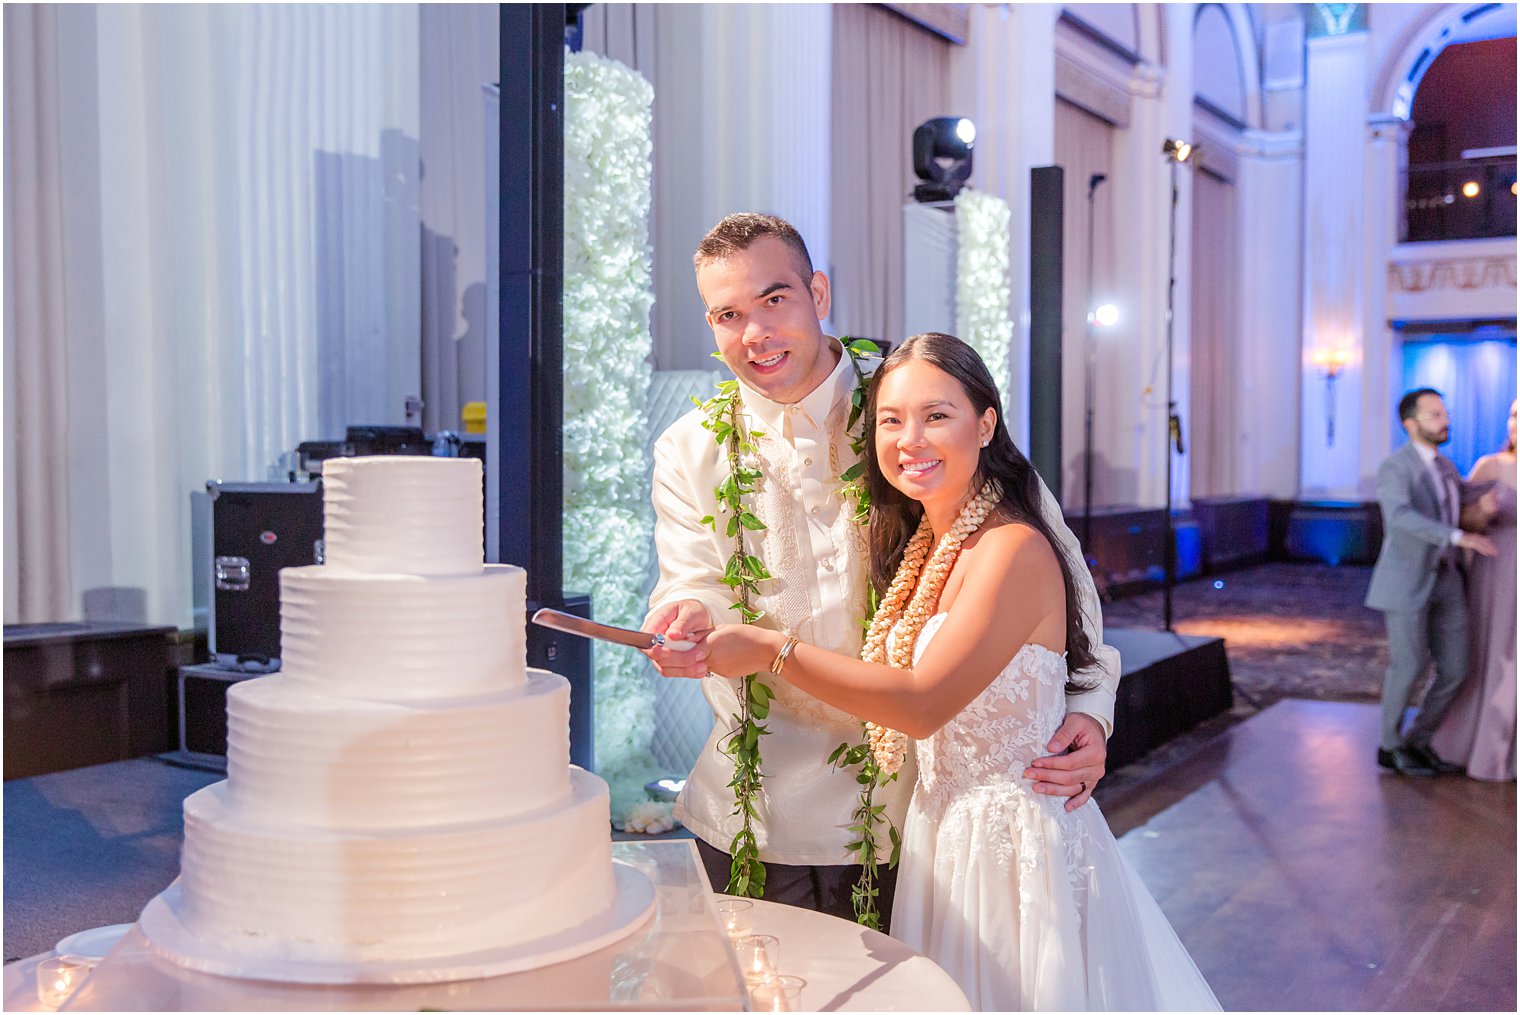 bride and groom cut wedding cake during Philly PA wedding reception 